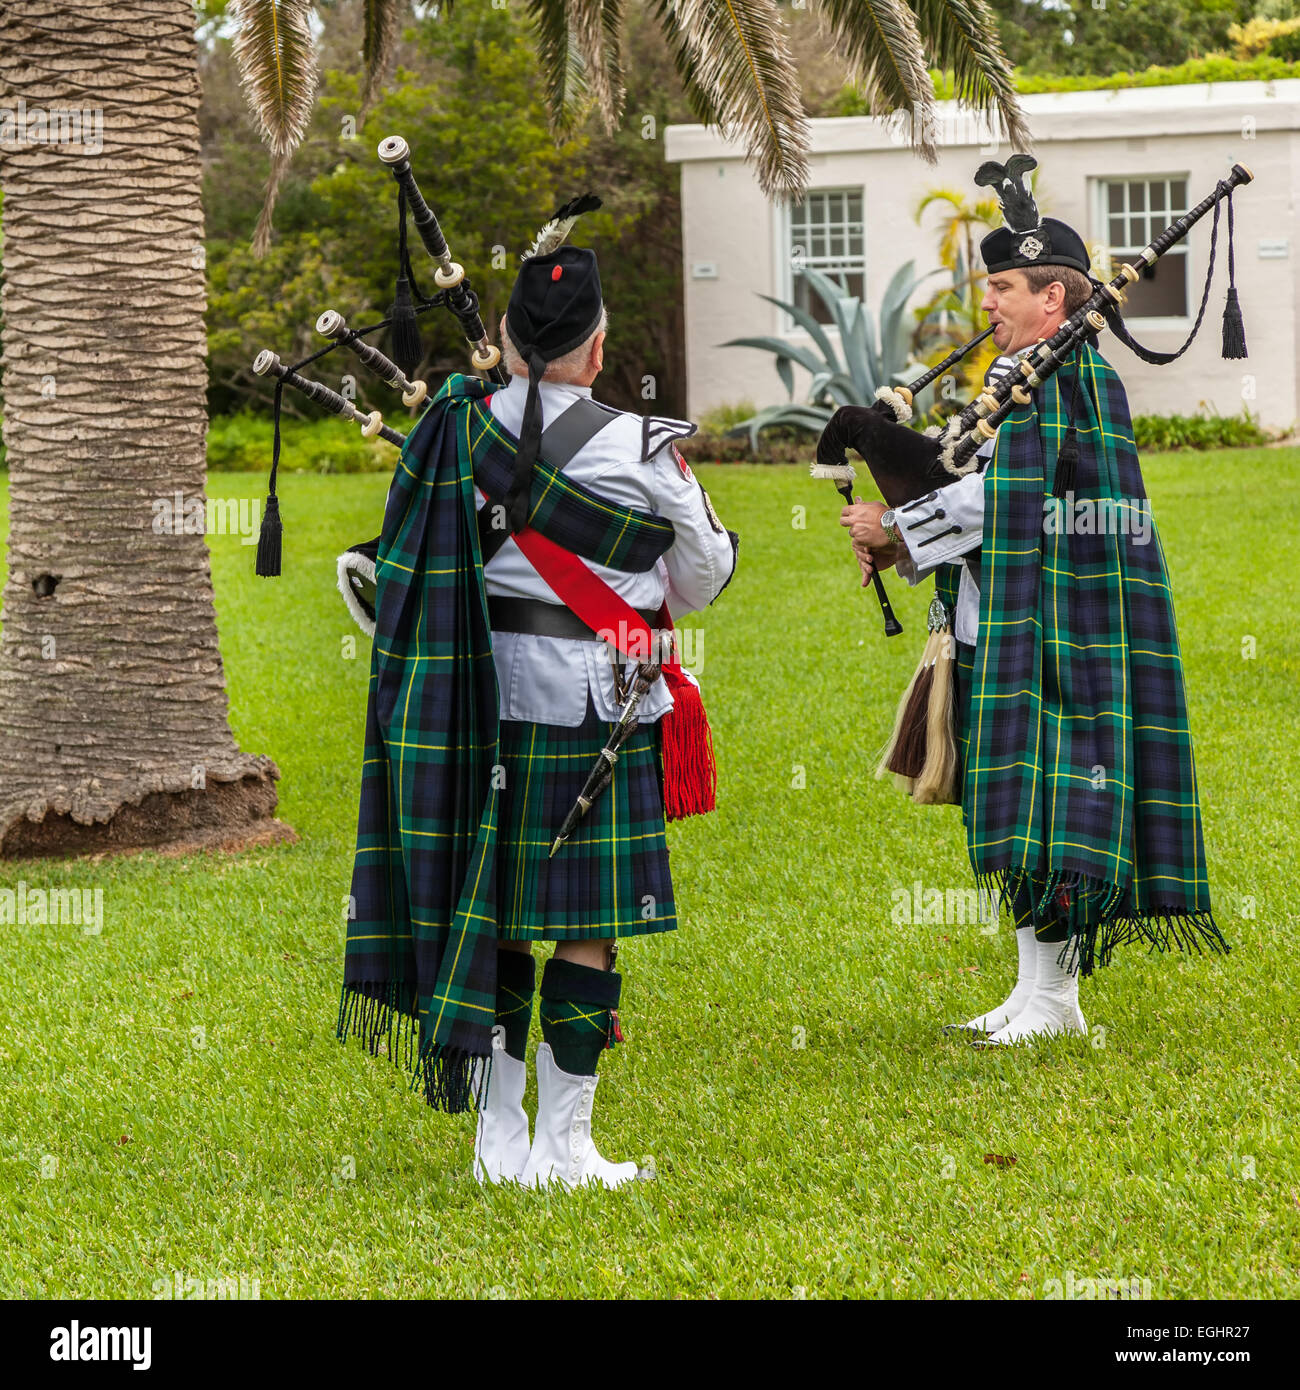 Kilted members of the Bermuda Islands Pipe Band play bagpipes on the grounds of Fort Hamilton in Hamilton, Bermuda. Stock Photo